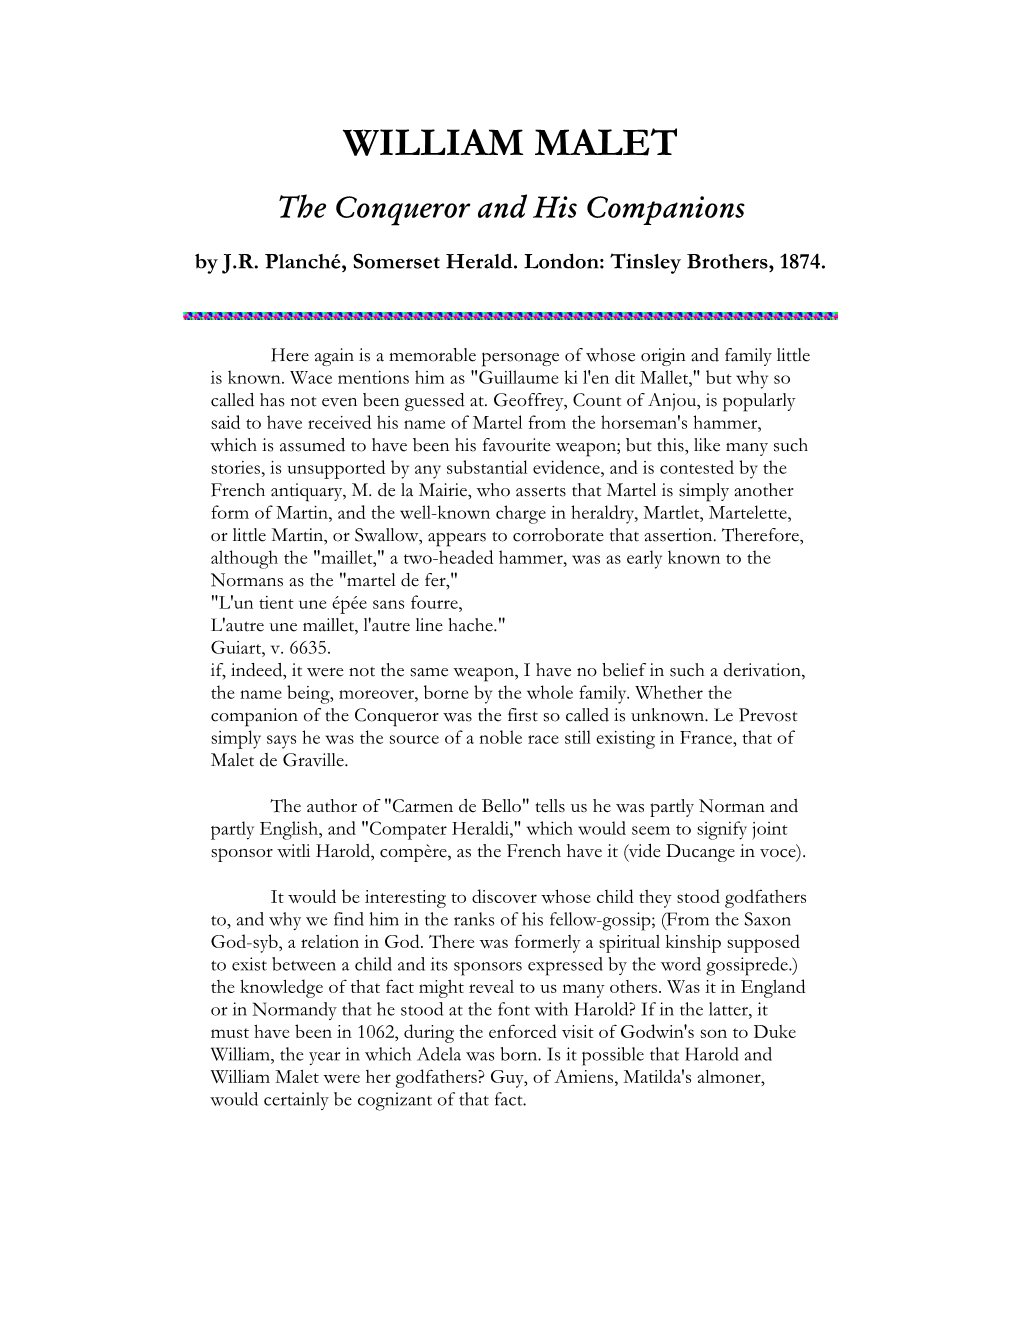 WILLIAM MALET the Conqueror and His Companions by J.R